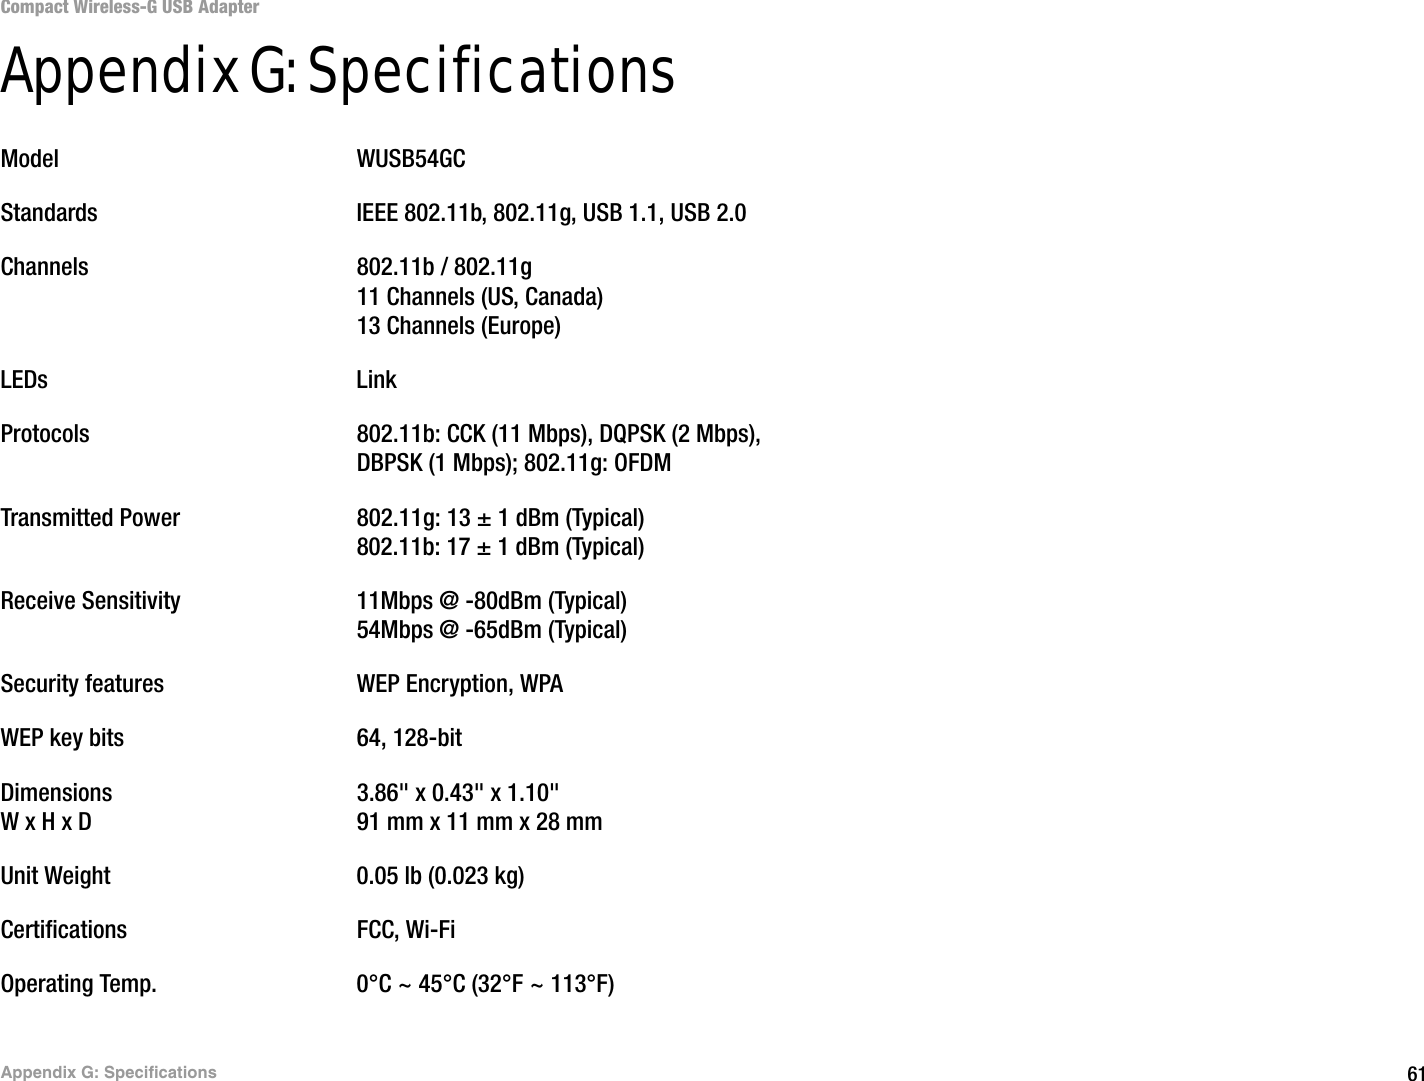 61Appendix G: SpecificationsCompact Wireless-G USB AdapterAppendix G: SpecificationsModel WUSB54GCStandards IEEE 802.11b, 802.11g, USB 1.1, USB 2.0Channels 802.11b / 802.11g11 Channels (US, Canada)13 Channels (Europe)LEDs LinkProtocols 802.11b: CCK (11 Mbps), DQPSK (2 Mbps), DBPSK (1 Mbps); 802.11g: OFDMTransmitted Power 802.11g: 13 ± 1 dBm (Typical)802.11b: 17 ± 1 dBm (Typical)Receive Sensitivity 11Mbps @ -80dBm (Typical)54Mbps @ -65dBm (Typical)Security features WEP Encryption, WPAWEP key bits 64, 128-bitDimensions 3.86&quot; x 0.43&quot; x 1.10&quot; W x H x D 91 mm x 11 mm x 28 mmUnit Weight 0.05 lb (0.023 kg)Certifications FCC, Wi-FiOperating Temp. 0°C ~ 45°C (32°F ~ 113°F)